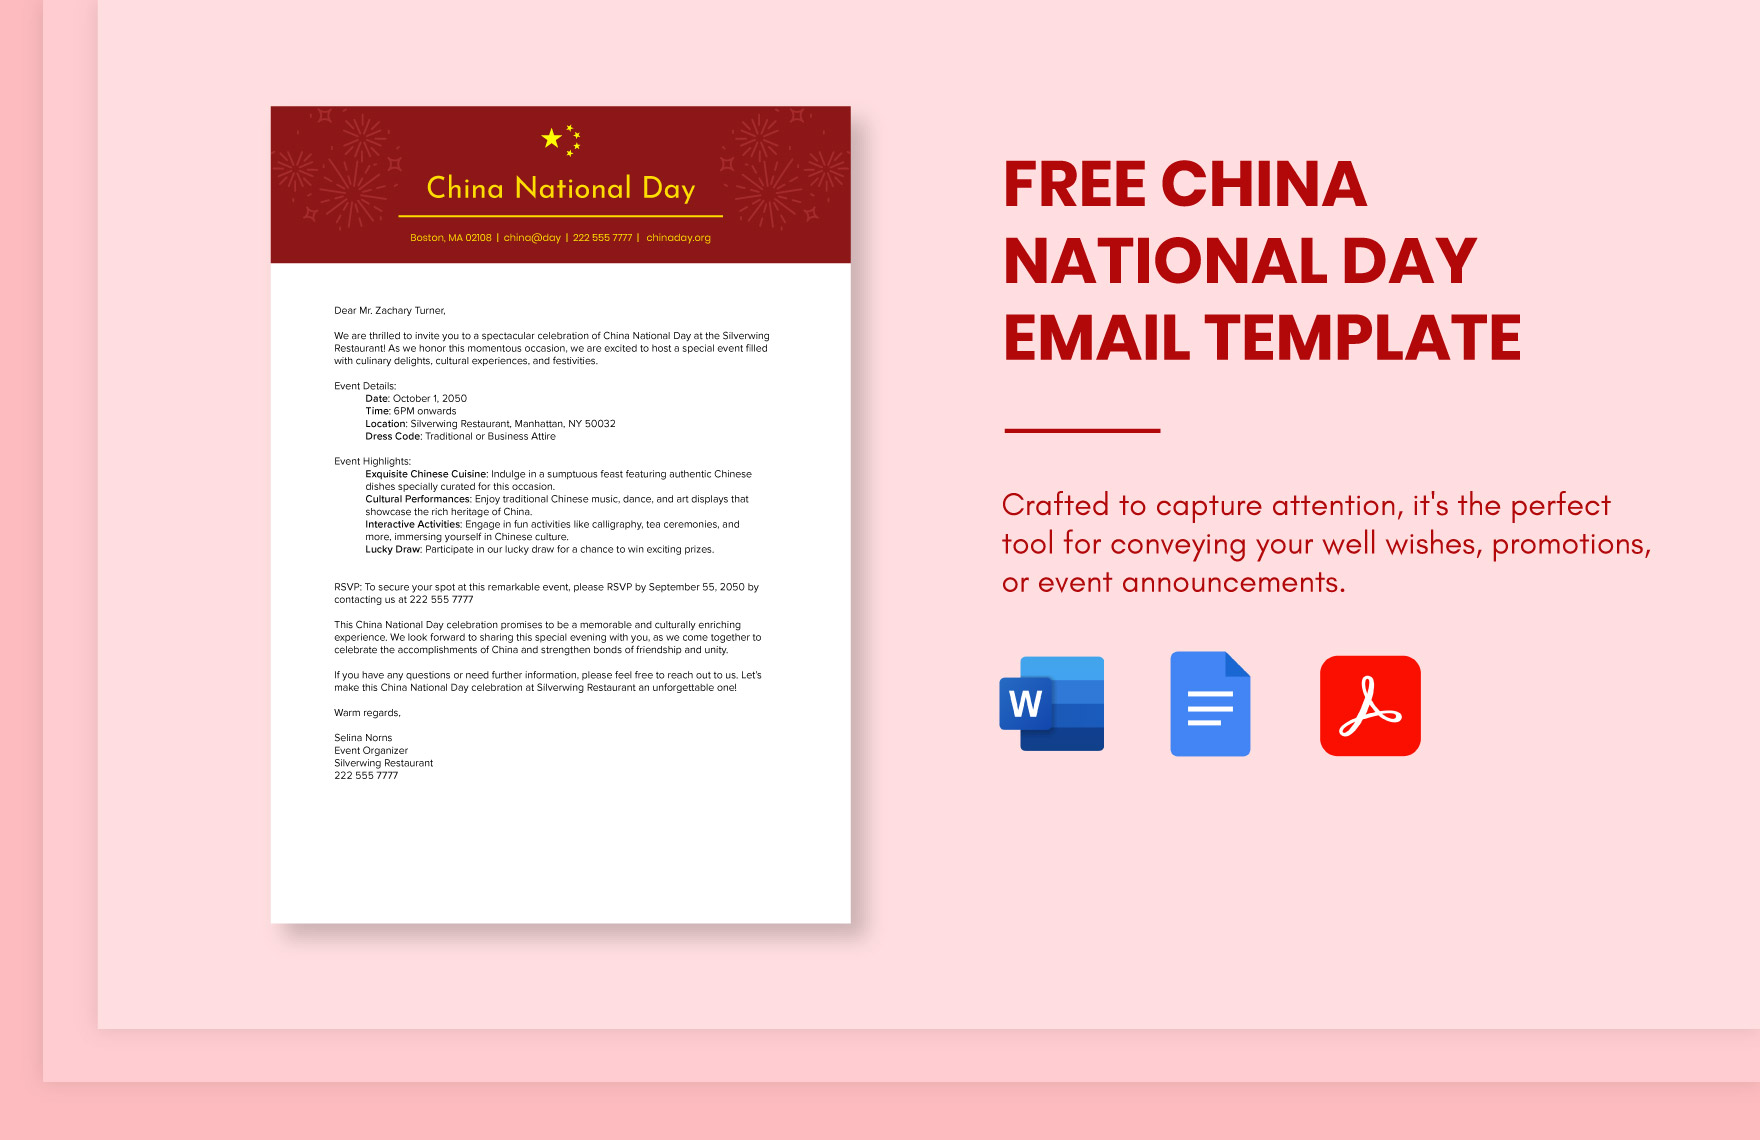 Free China National Day Email Template in Word, Google Docs, PDF